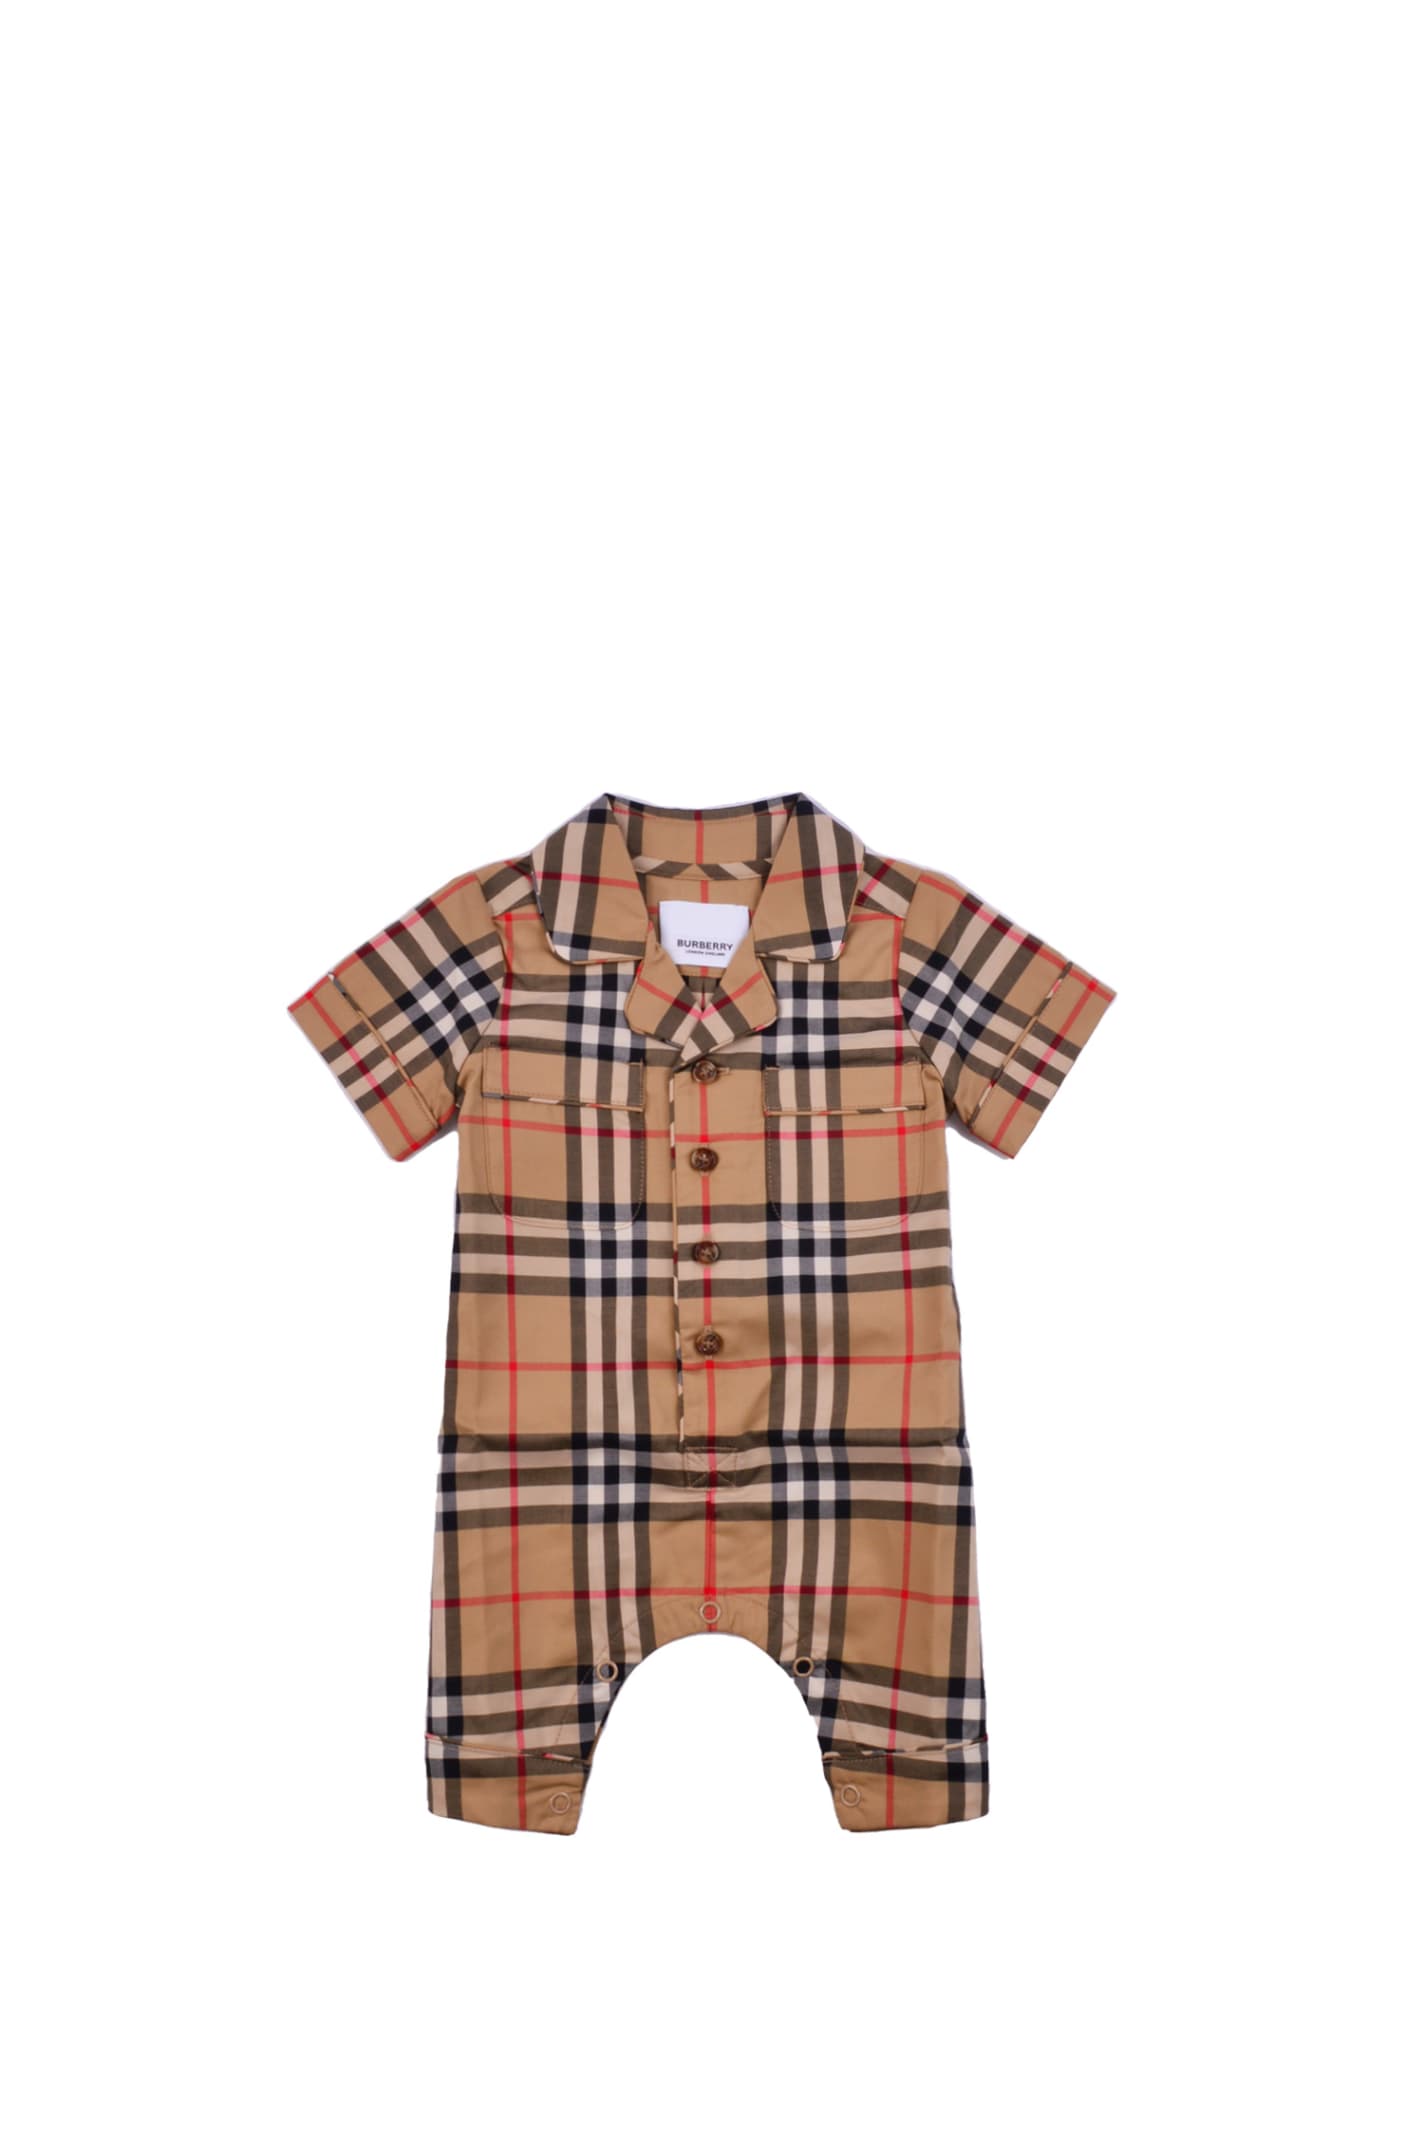 BURBERRY ROMPER WITH VINTAGE CHECK PATTERN